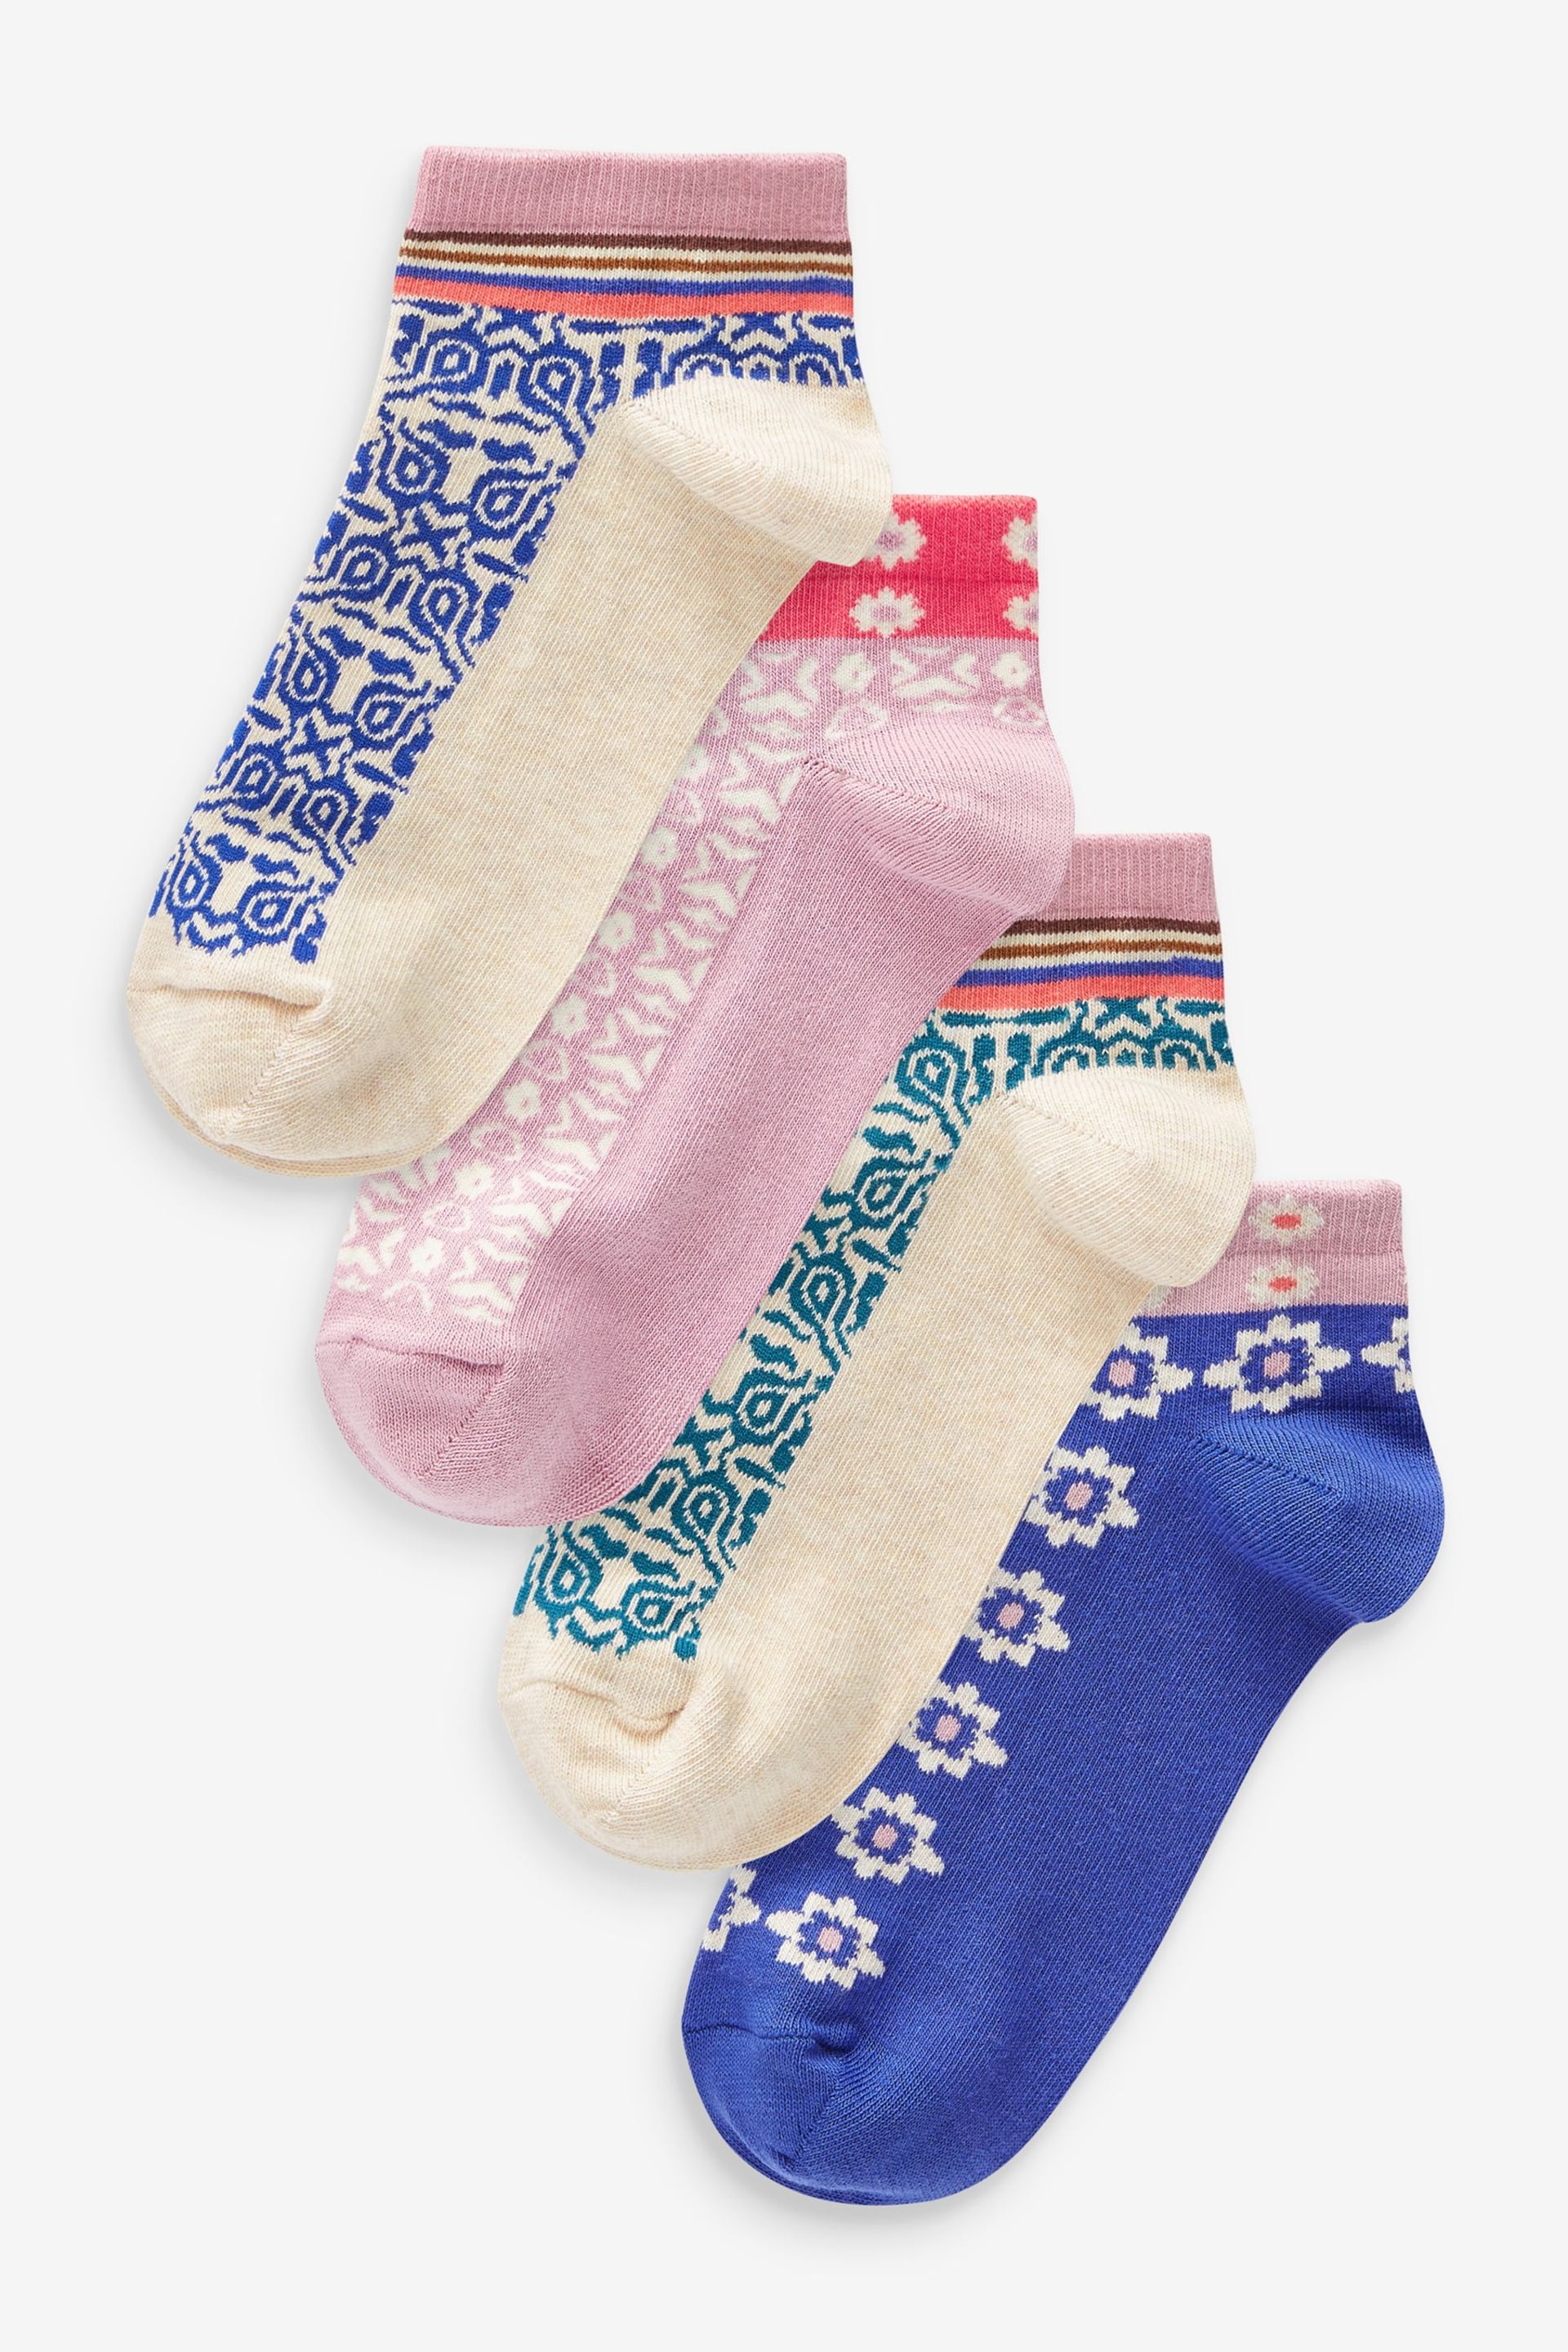 Blue/Pink Tile Print Trainers Socks 4 Pack - Image 1 of 1